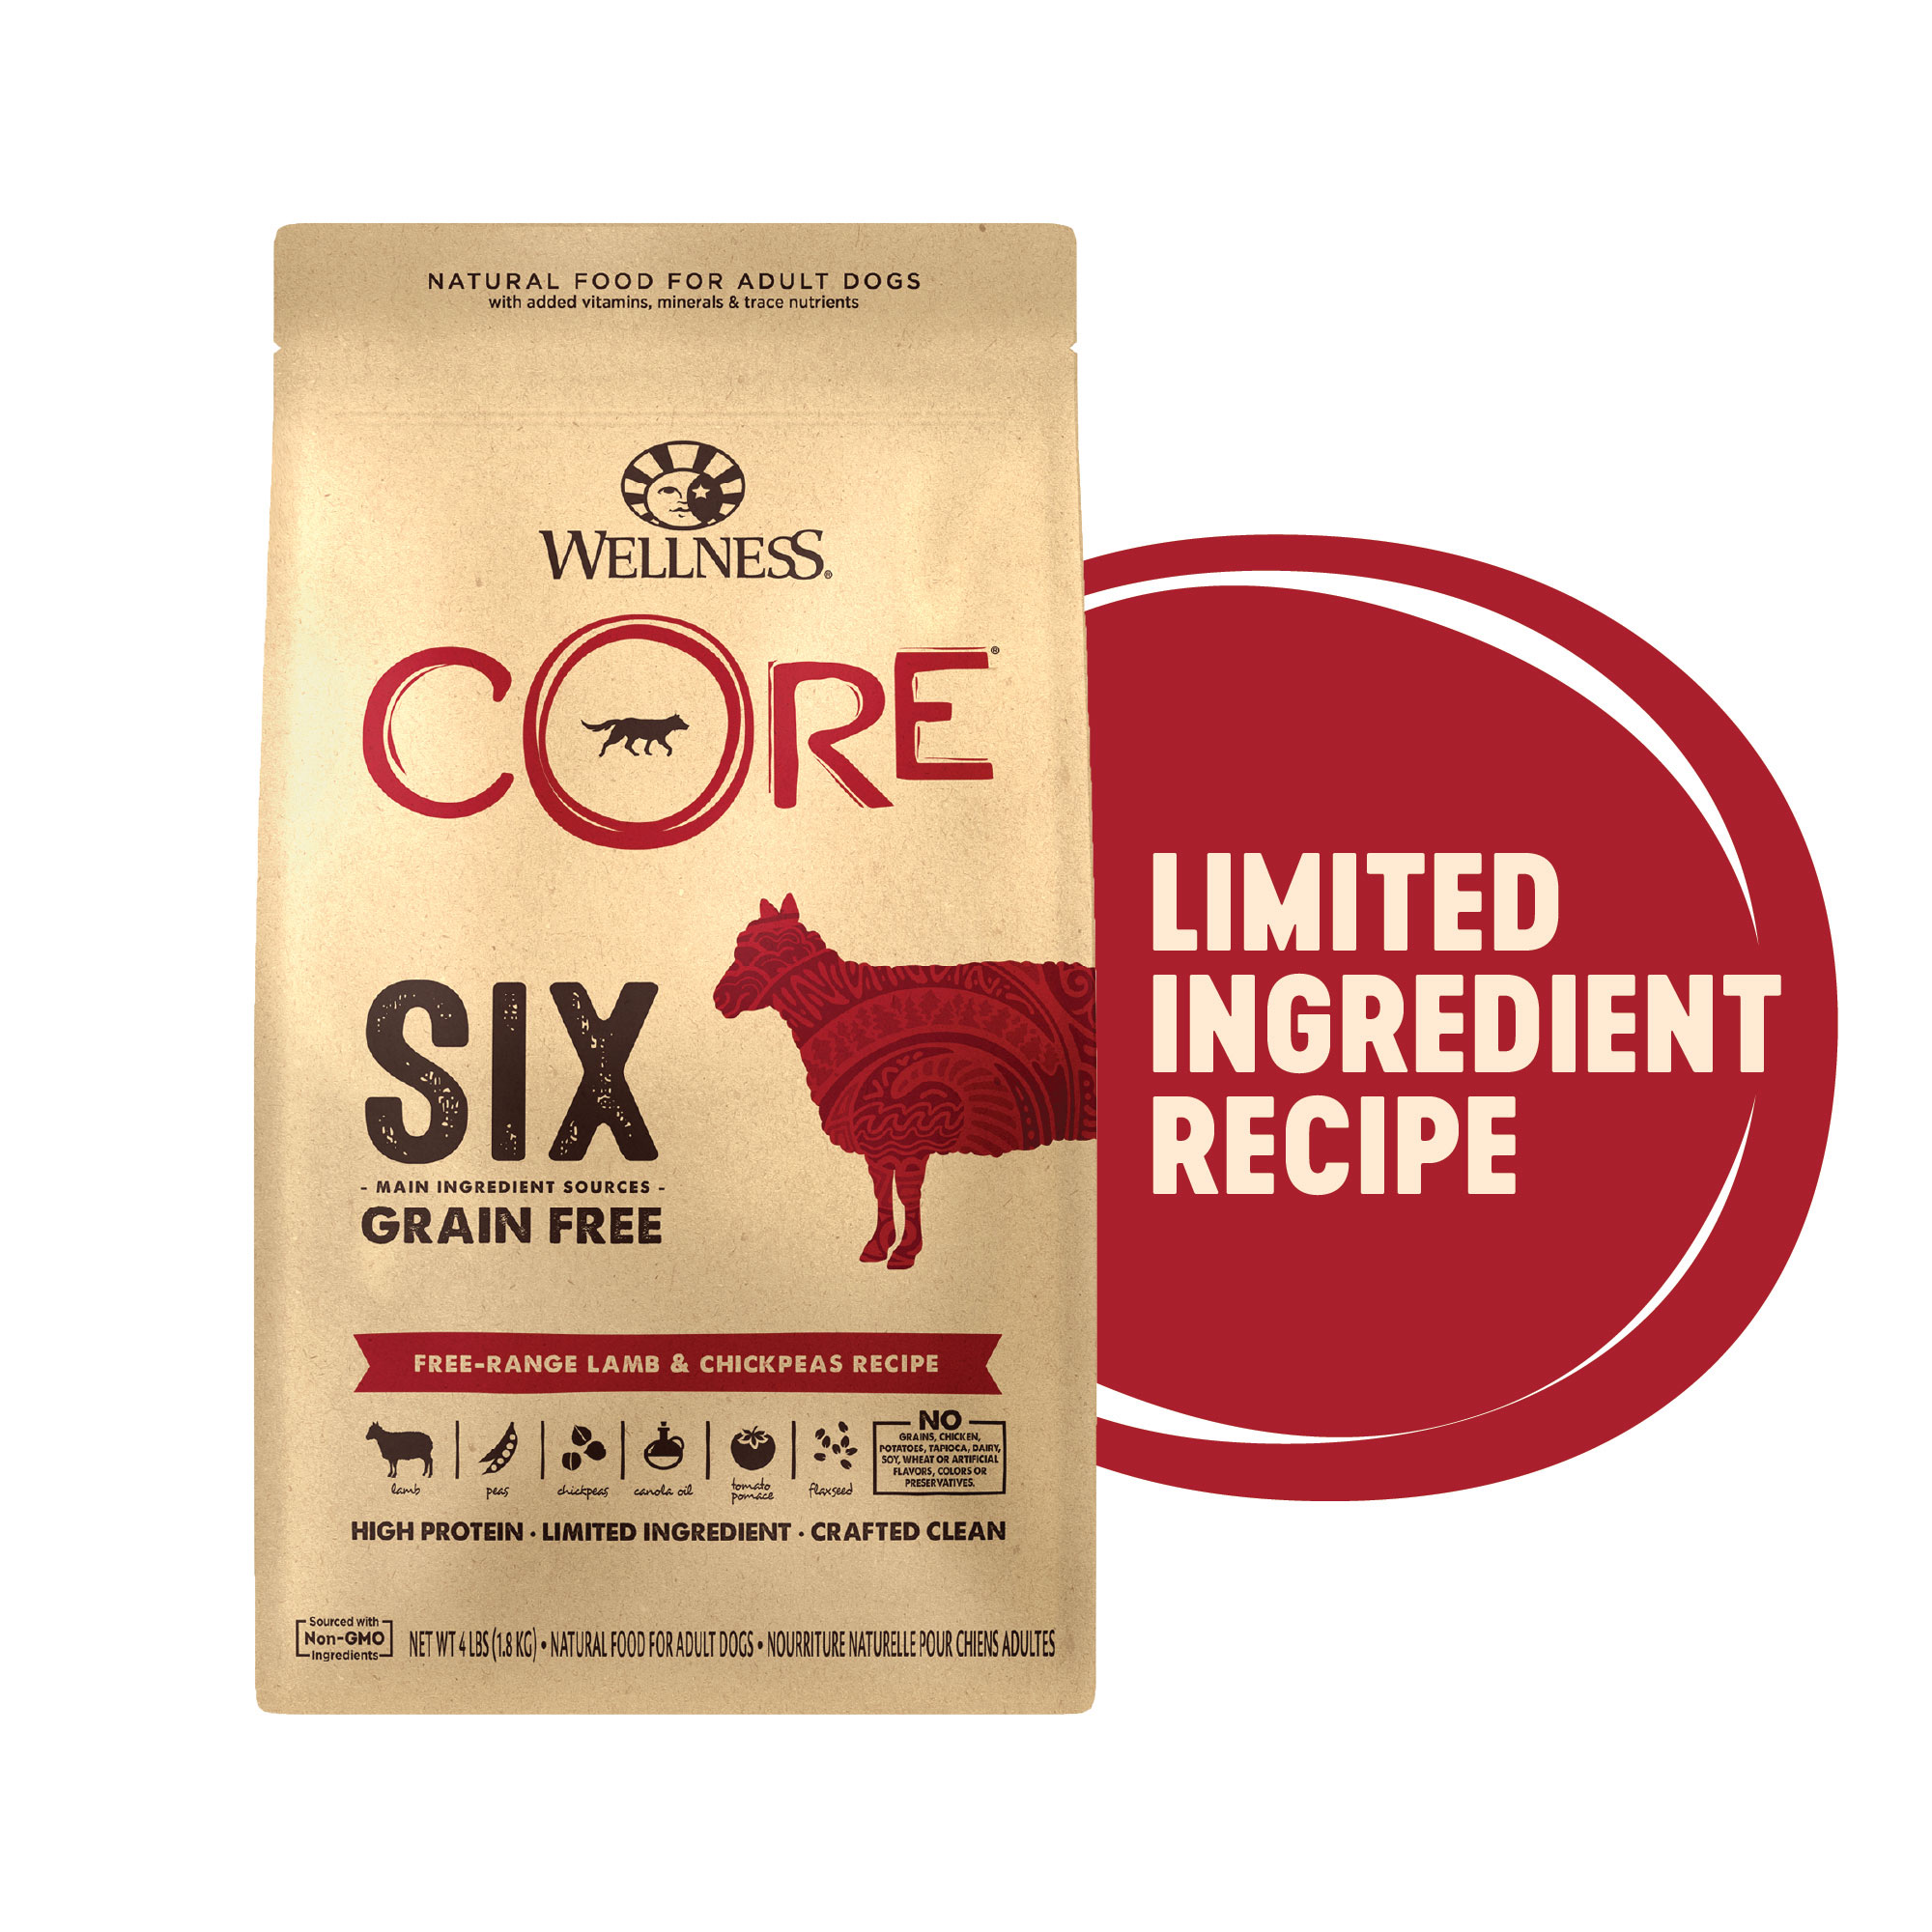 Wellness CORE Natural Grain Free SIX, Free-Range Lamb with Chickpeas Recipe, 22-Pound Bag - image 1 of 9